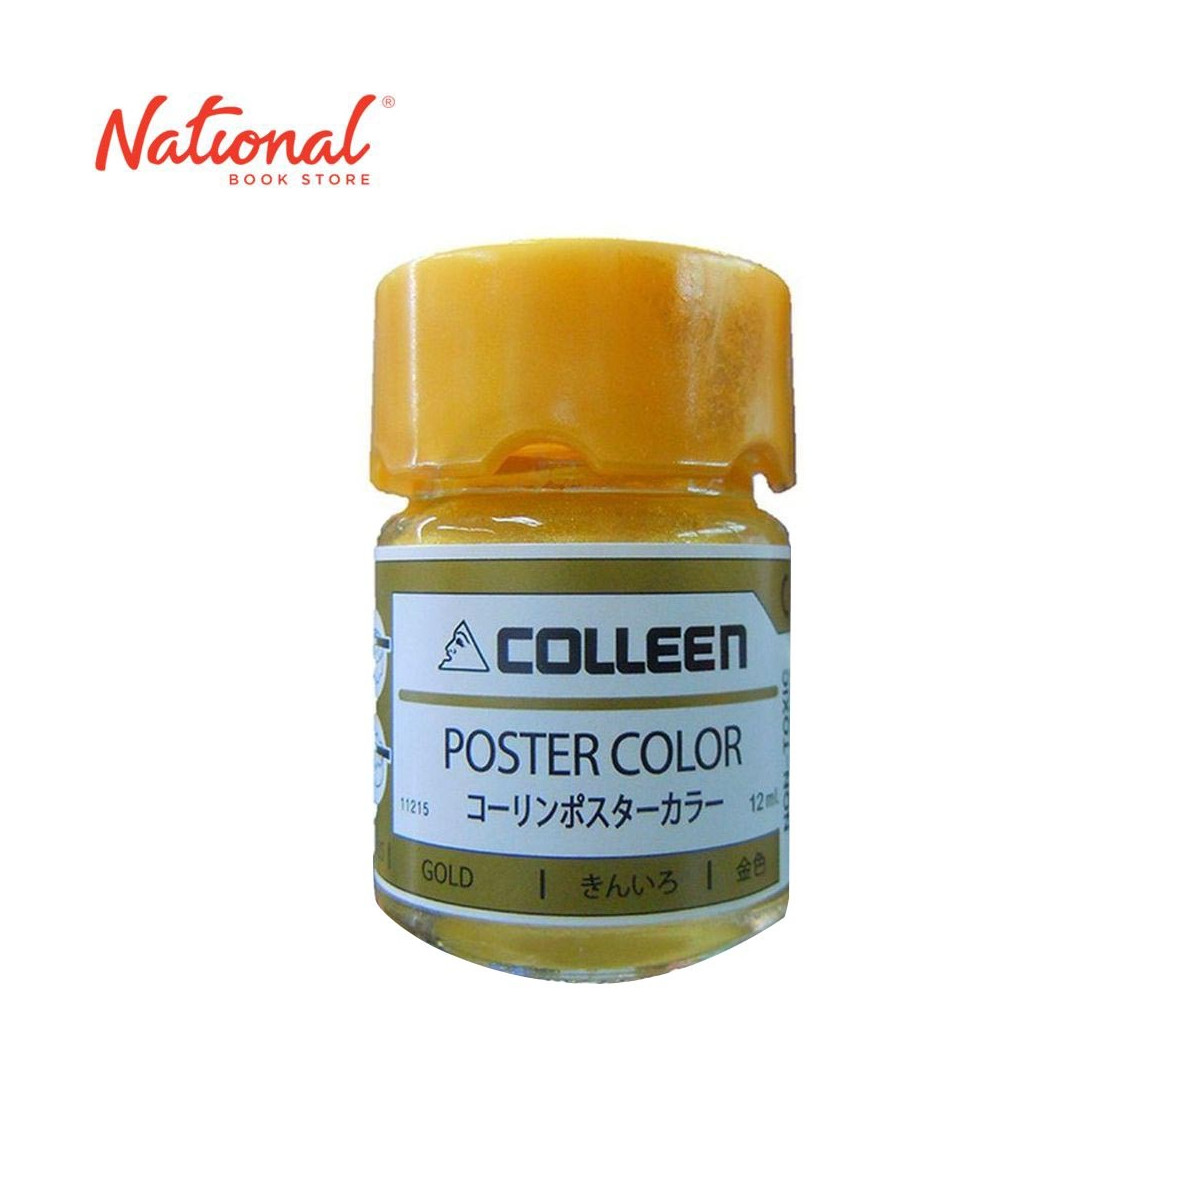 COLLEEN POSTER COLOR 11215 12 ML GOLD